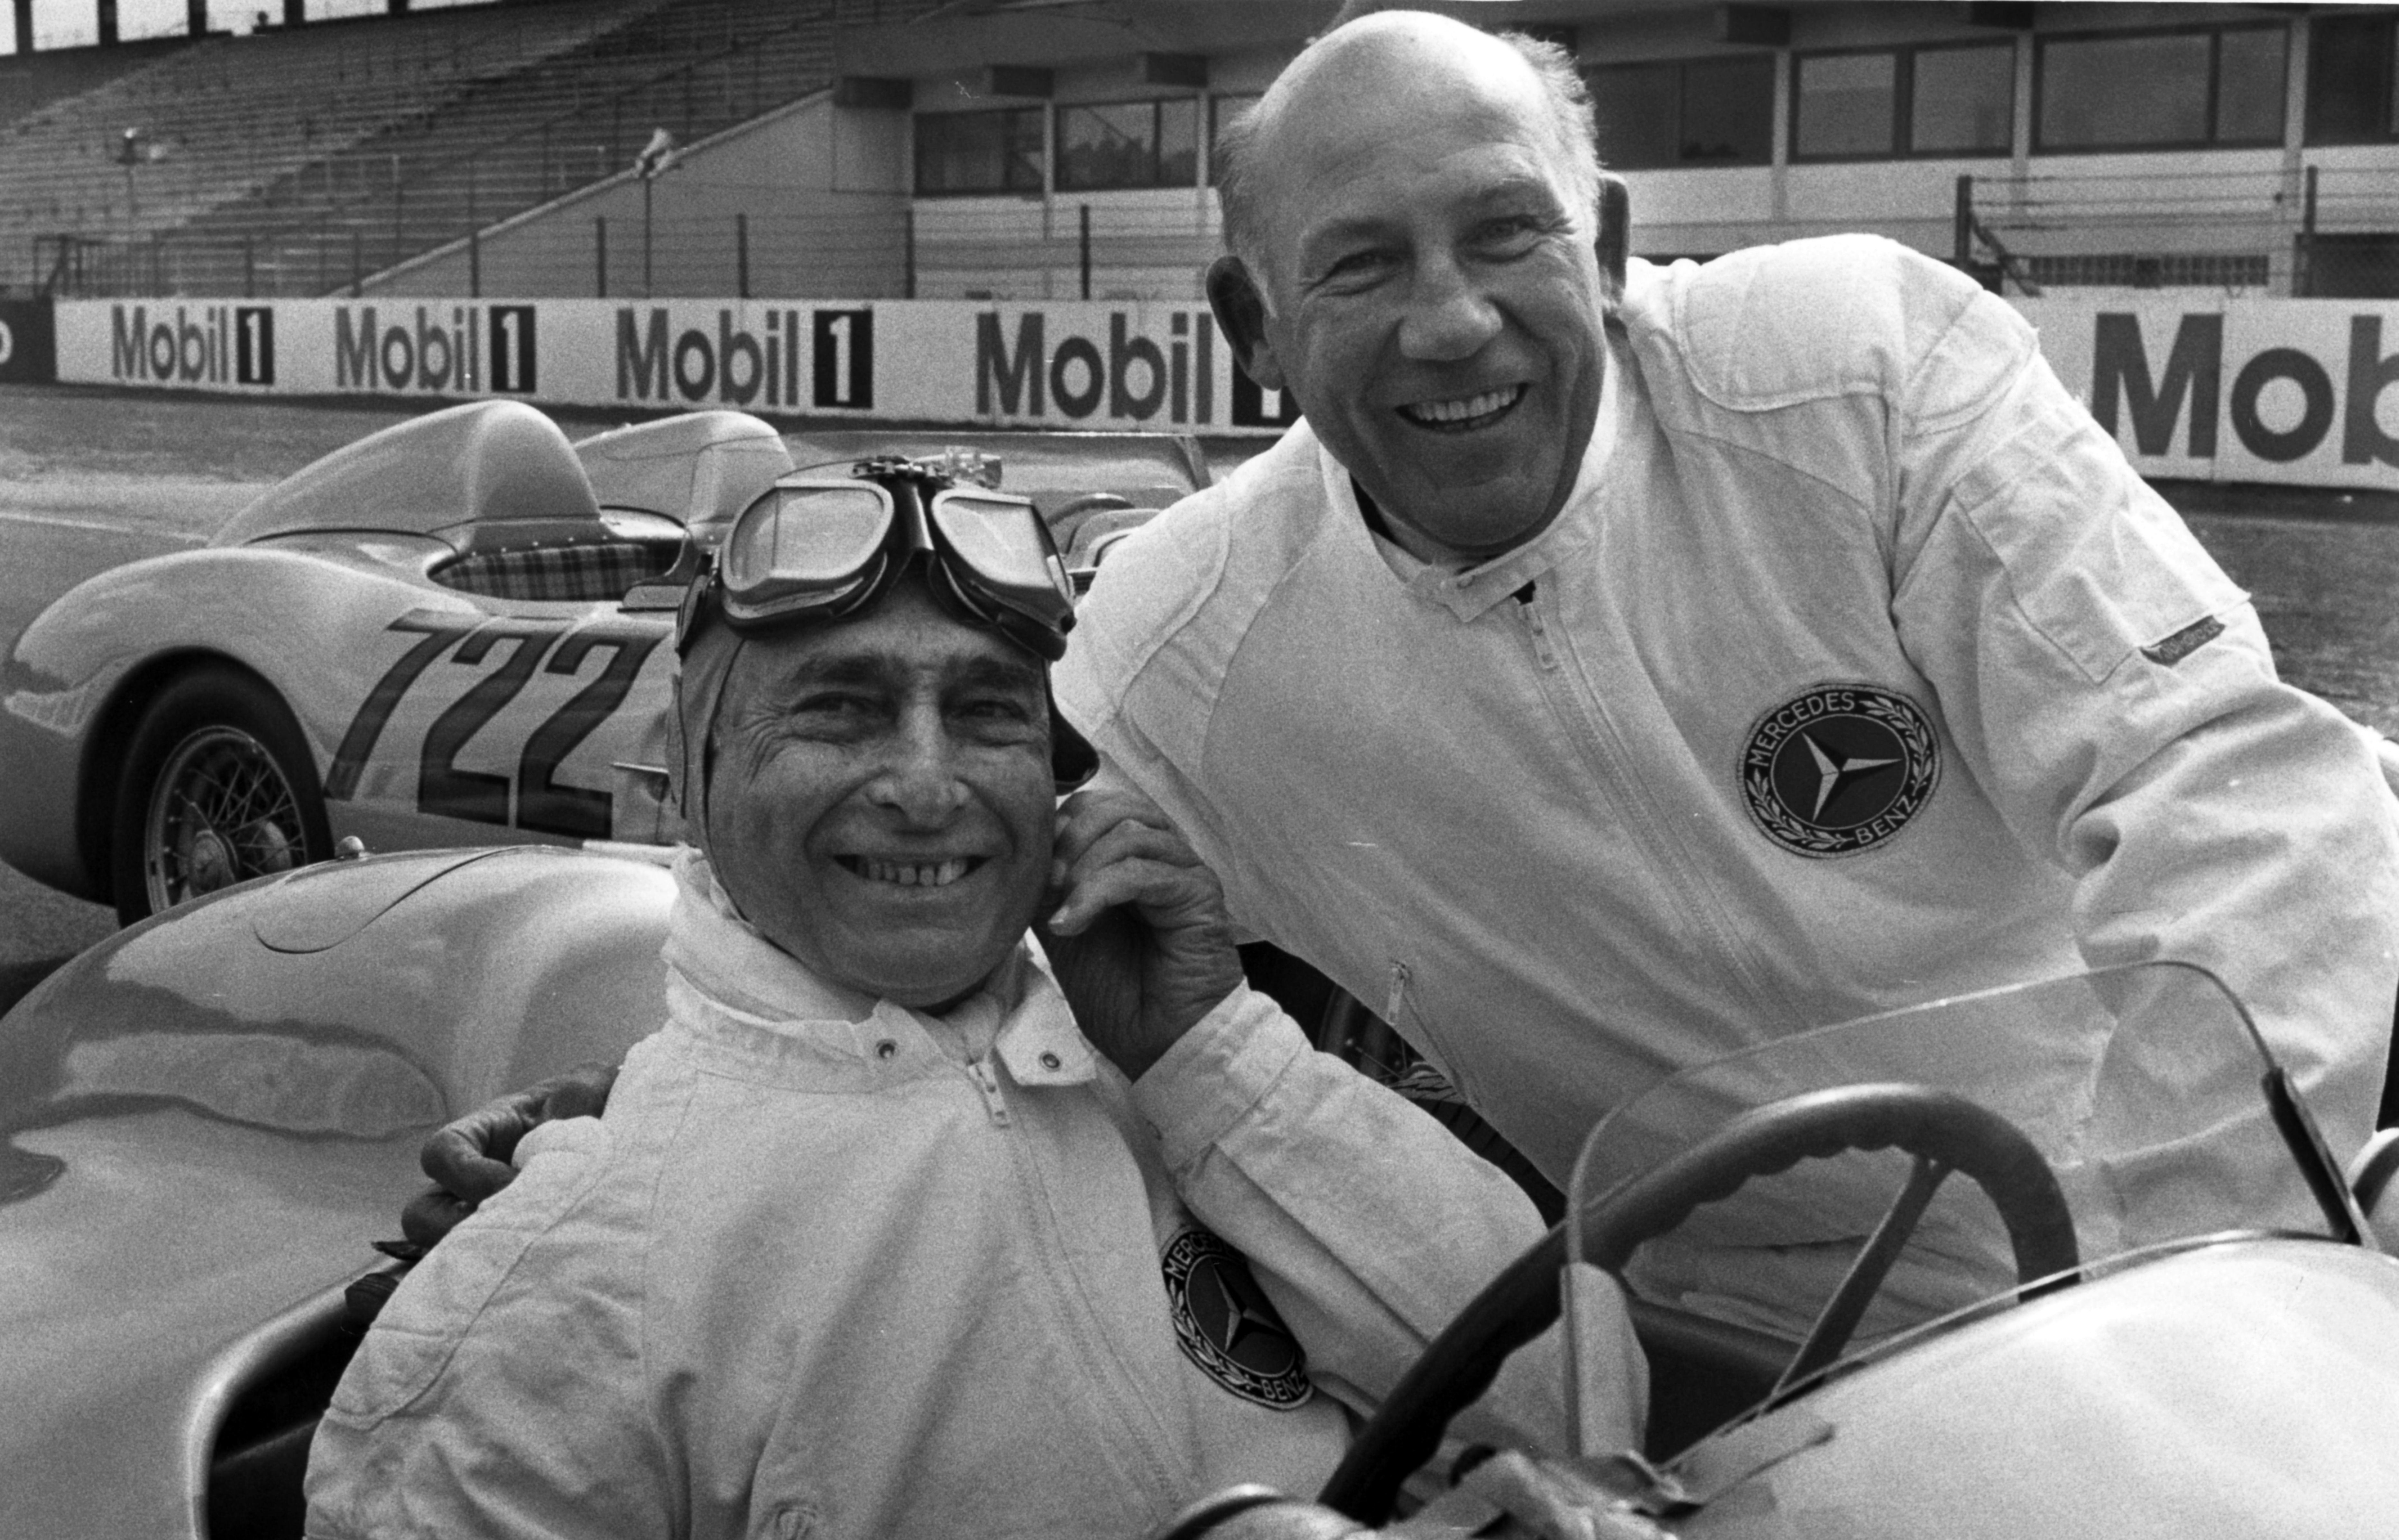 Former British racing driver Stirling Moss (r) and his former competitor Juan Manuel Fangio from Argentina pose together on April 24, 1991.